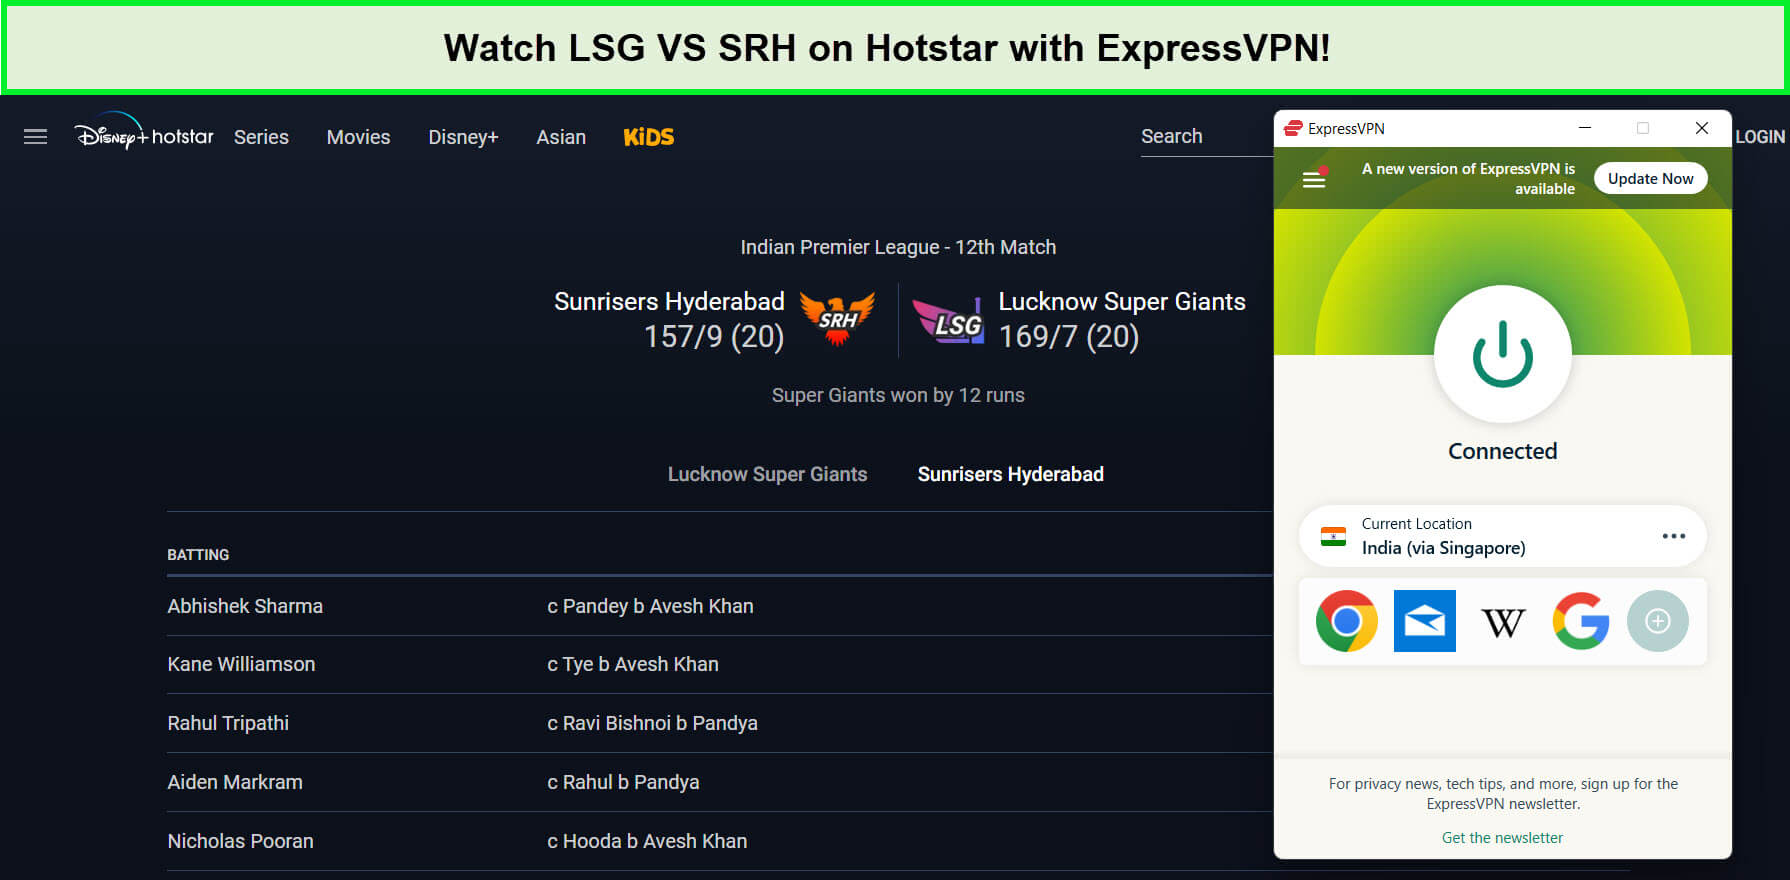 watch-lucknow-super-giants-vs-sunirisers-hyderabad-in-Italy-on-hotstar-with-expressvpn